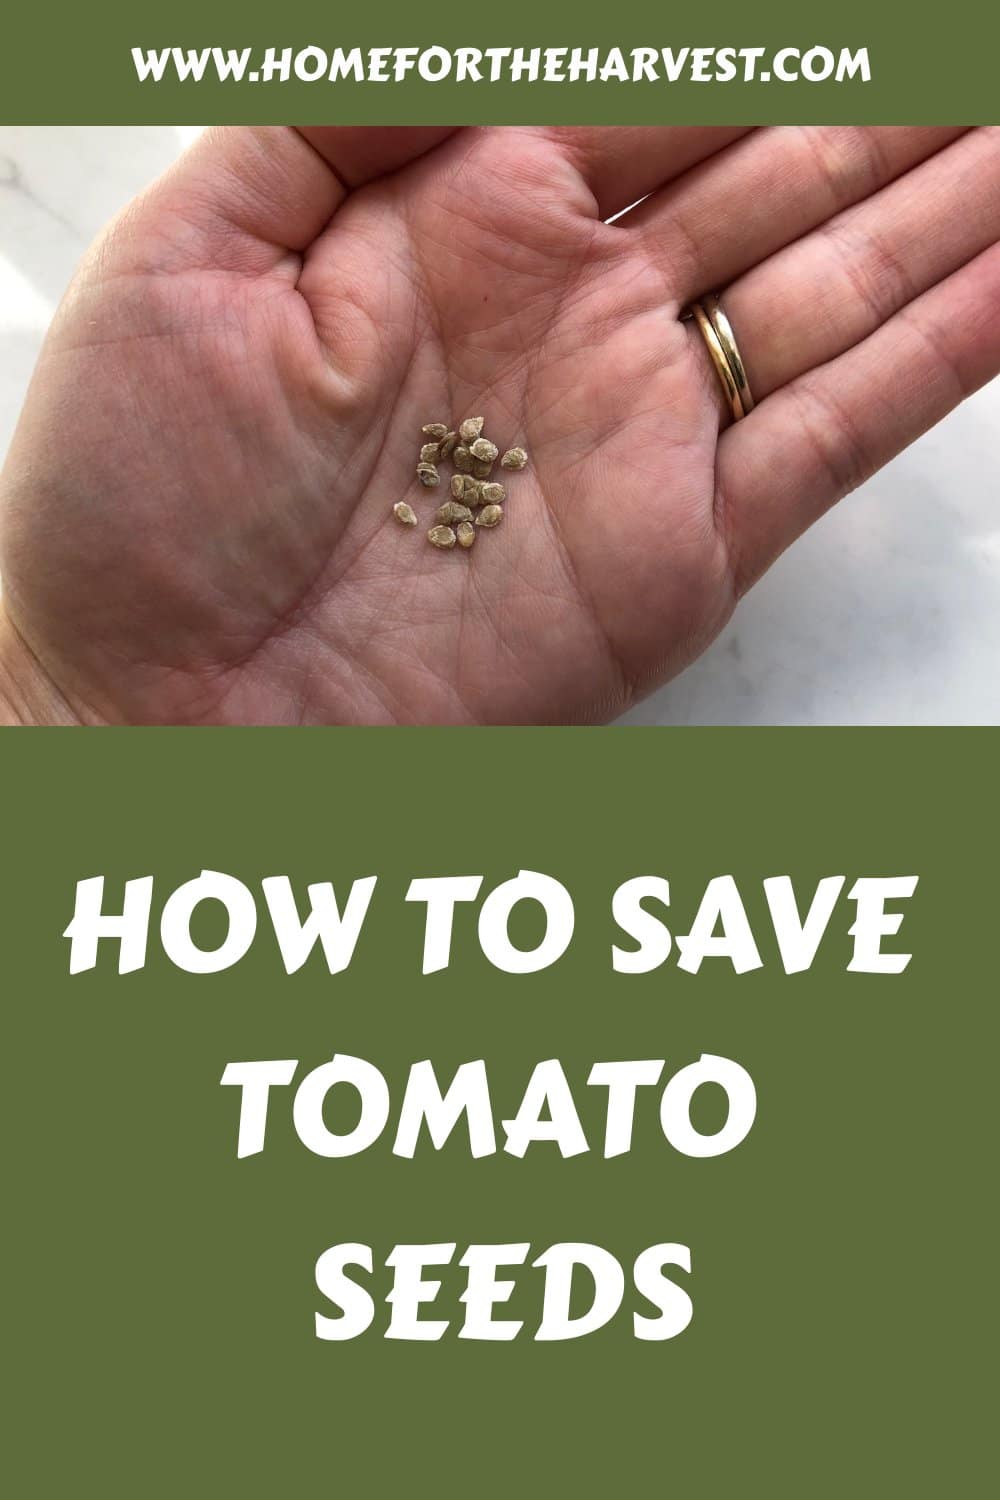 How to save tomato seeds generated pin 39613 1